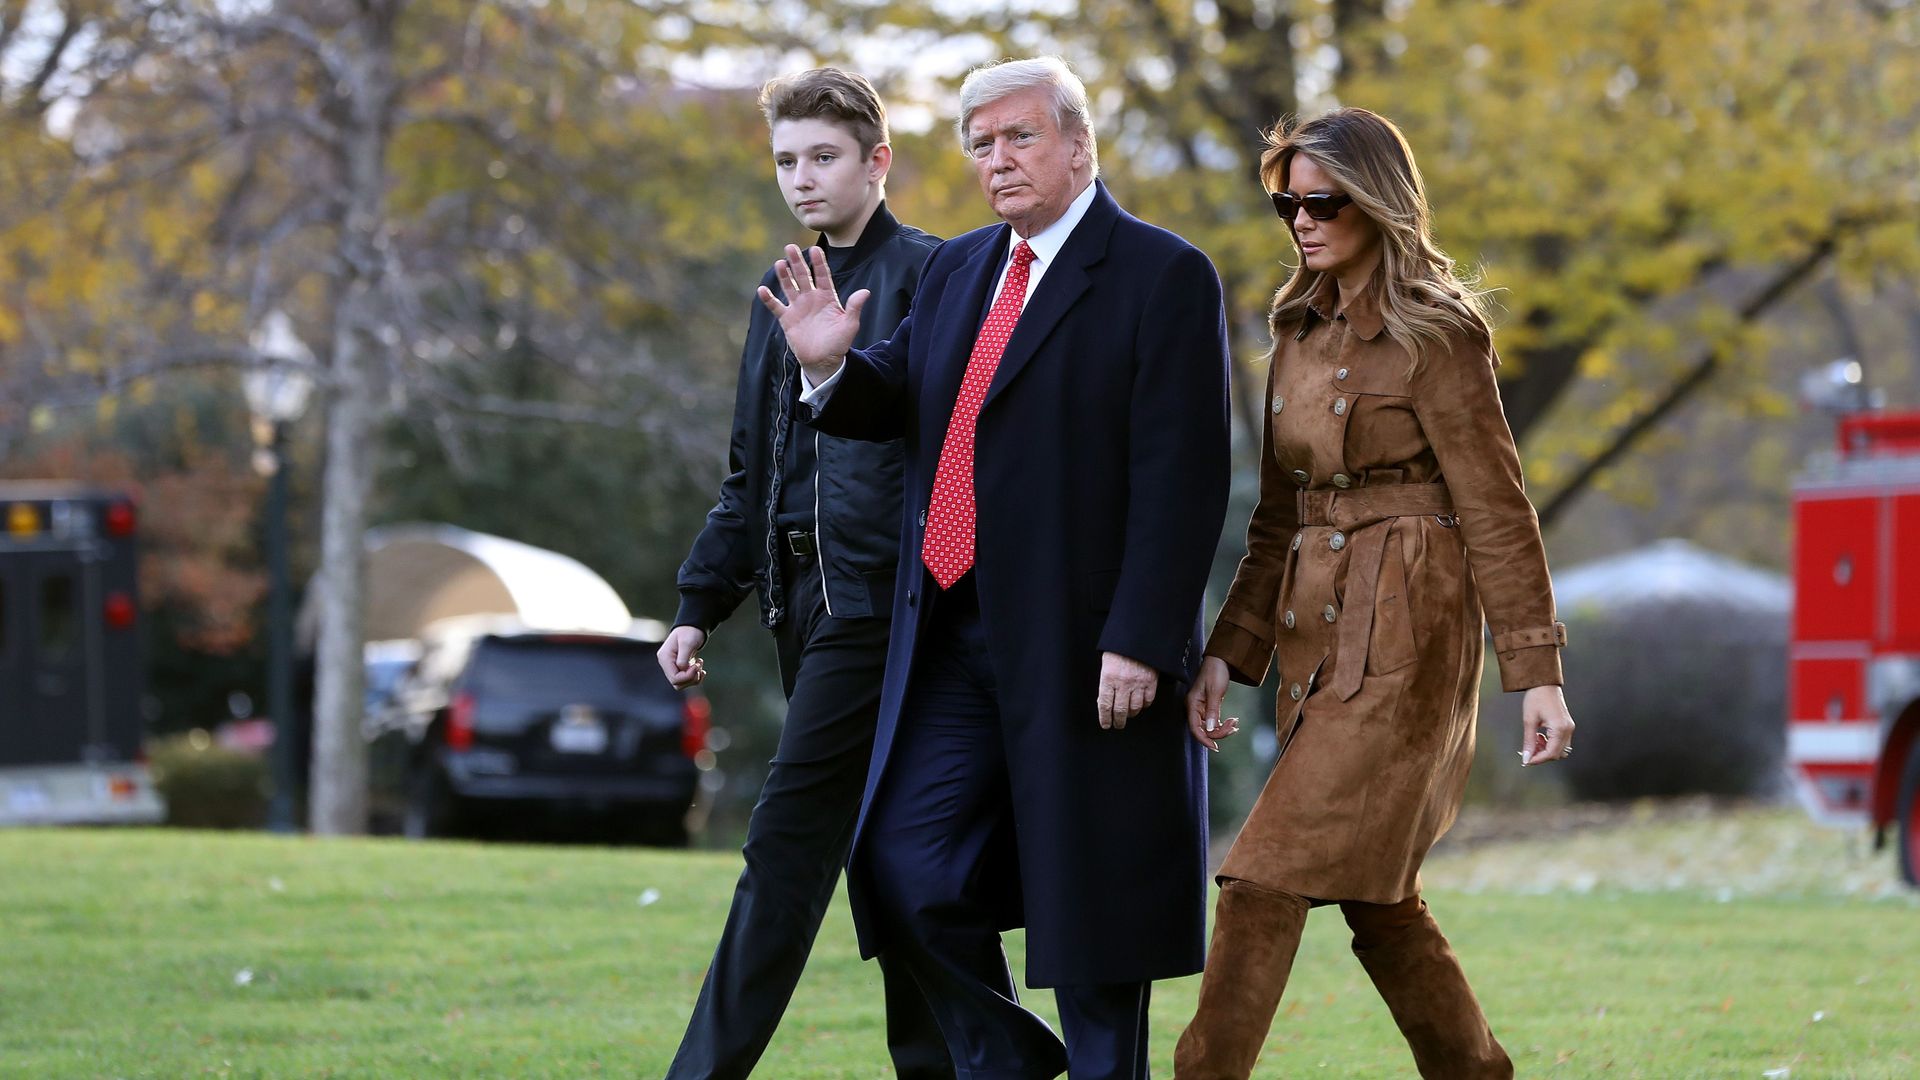 President Trump, First Lady Melania Trump and their son Barron, 13, leave the White House for Mar-a-Lago on Tuesday